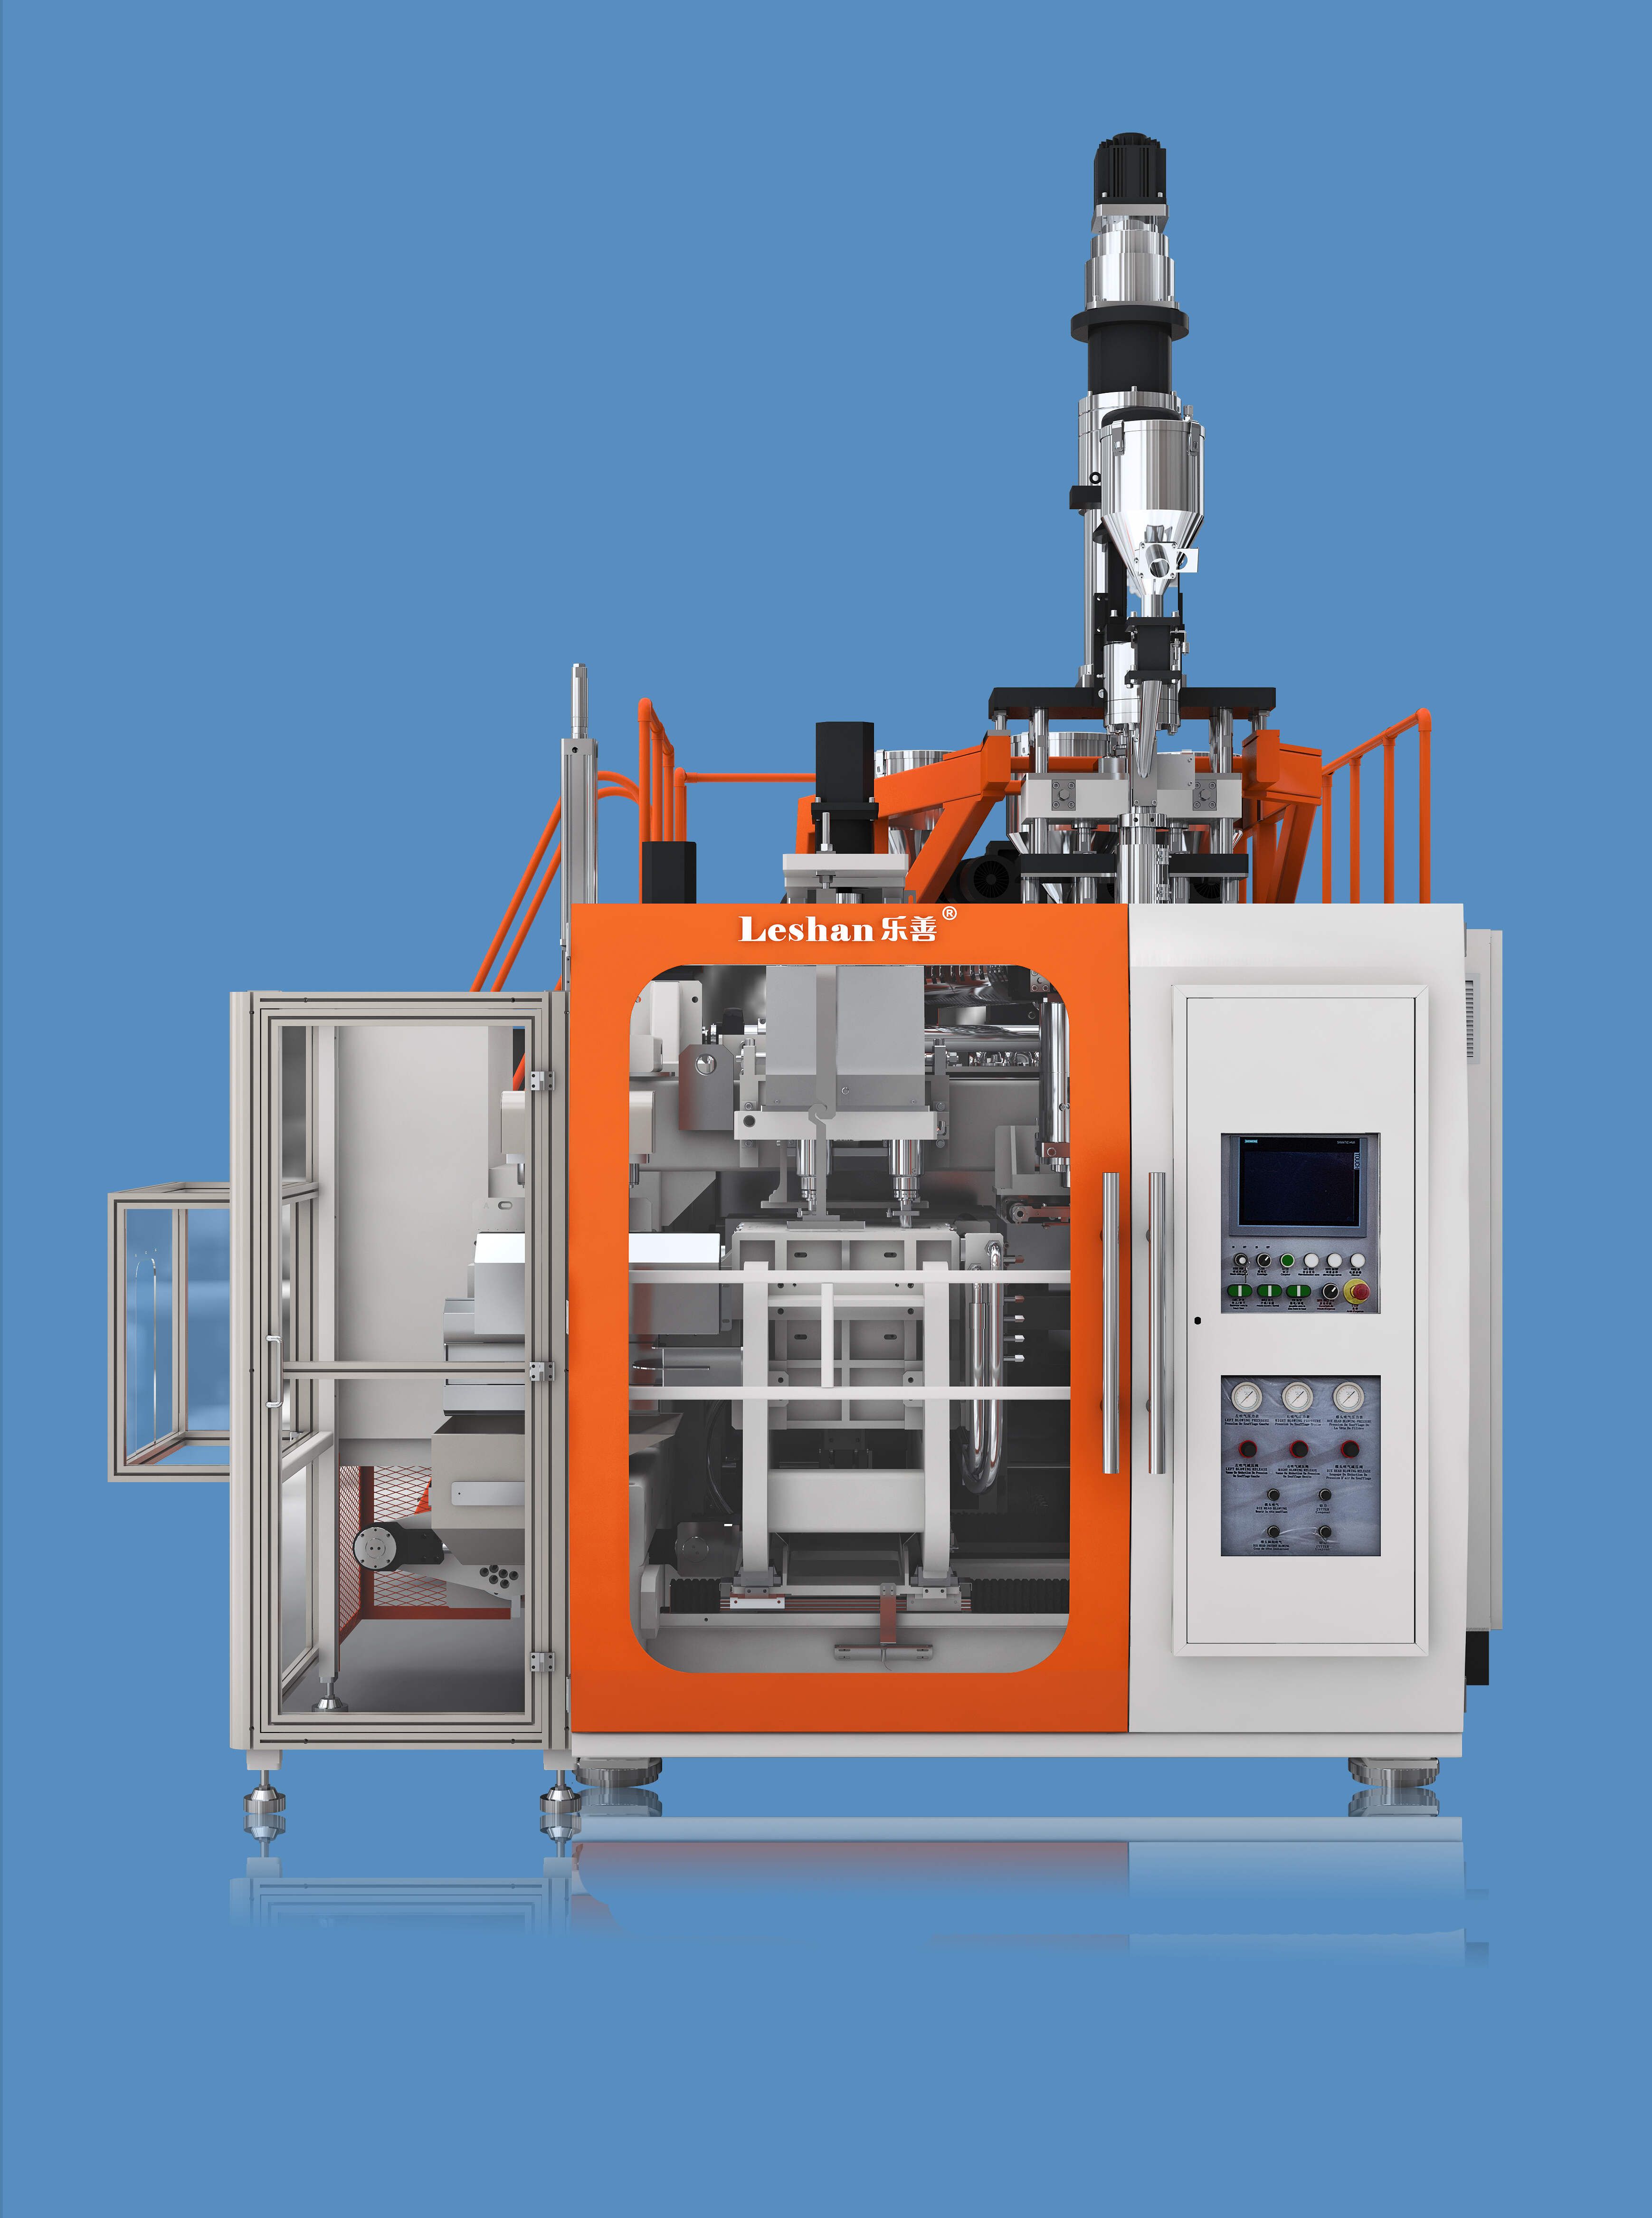 How to solve the vibration problem of blow molding machine?